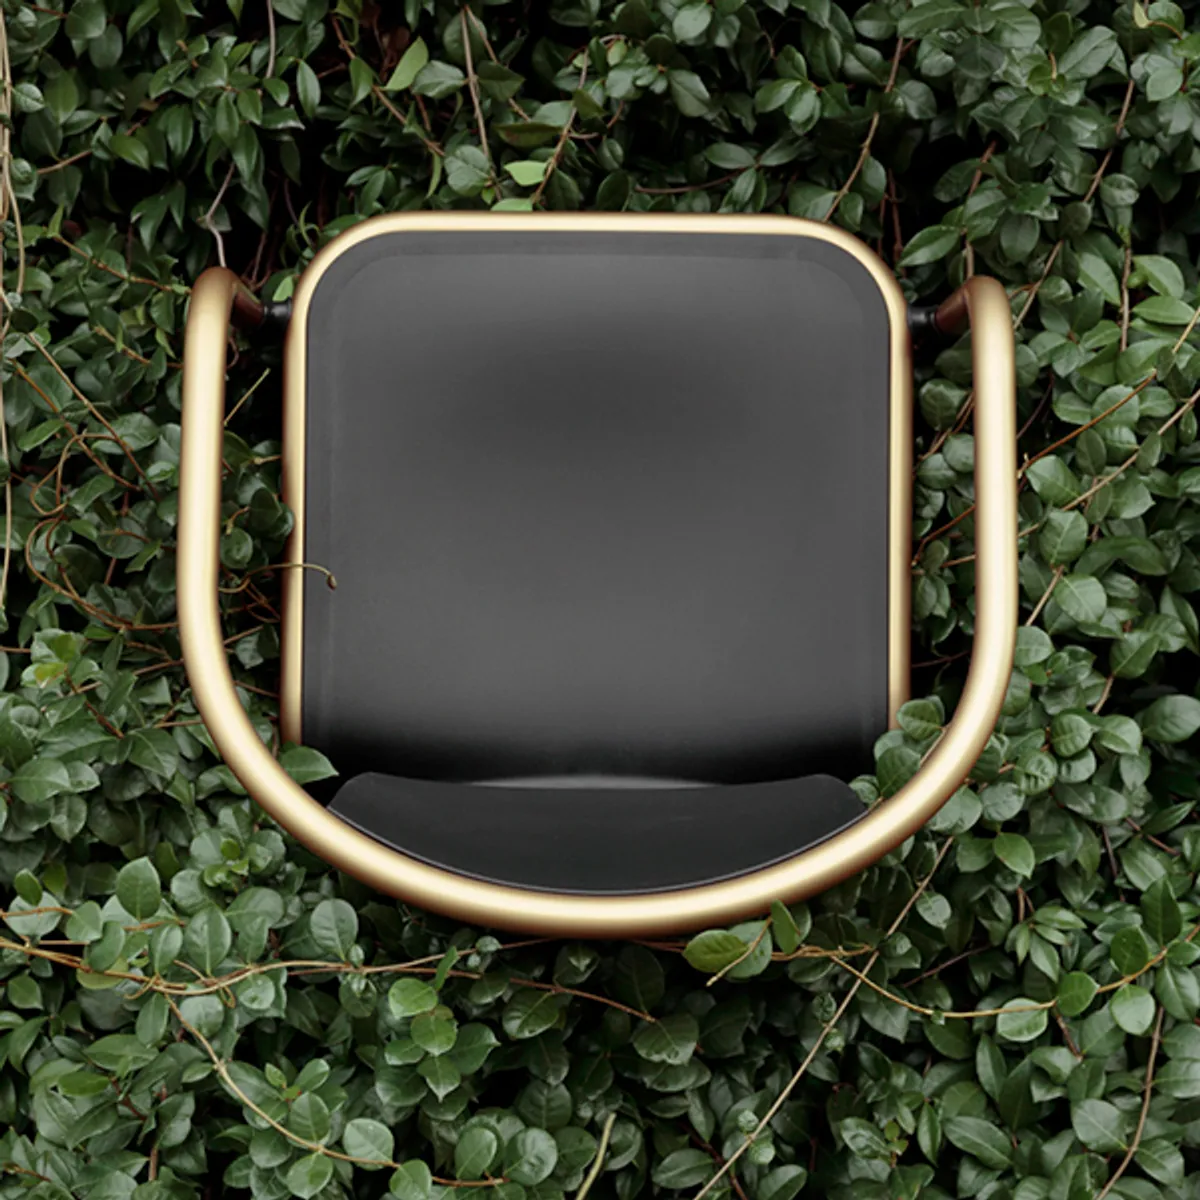 Mare Armchair For Outdoors In Bronze And Black Finish